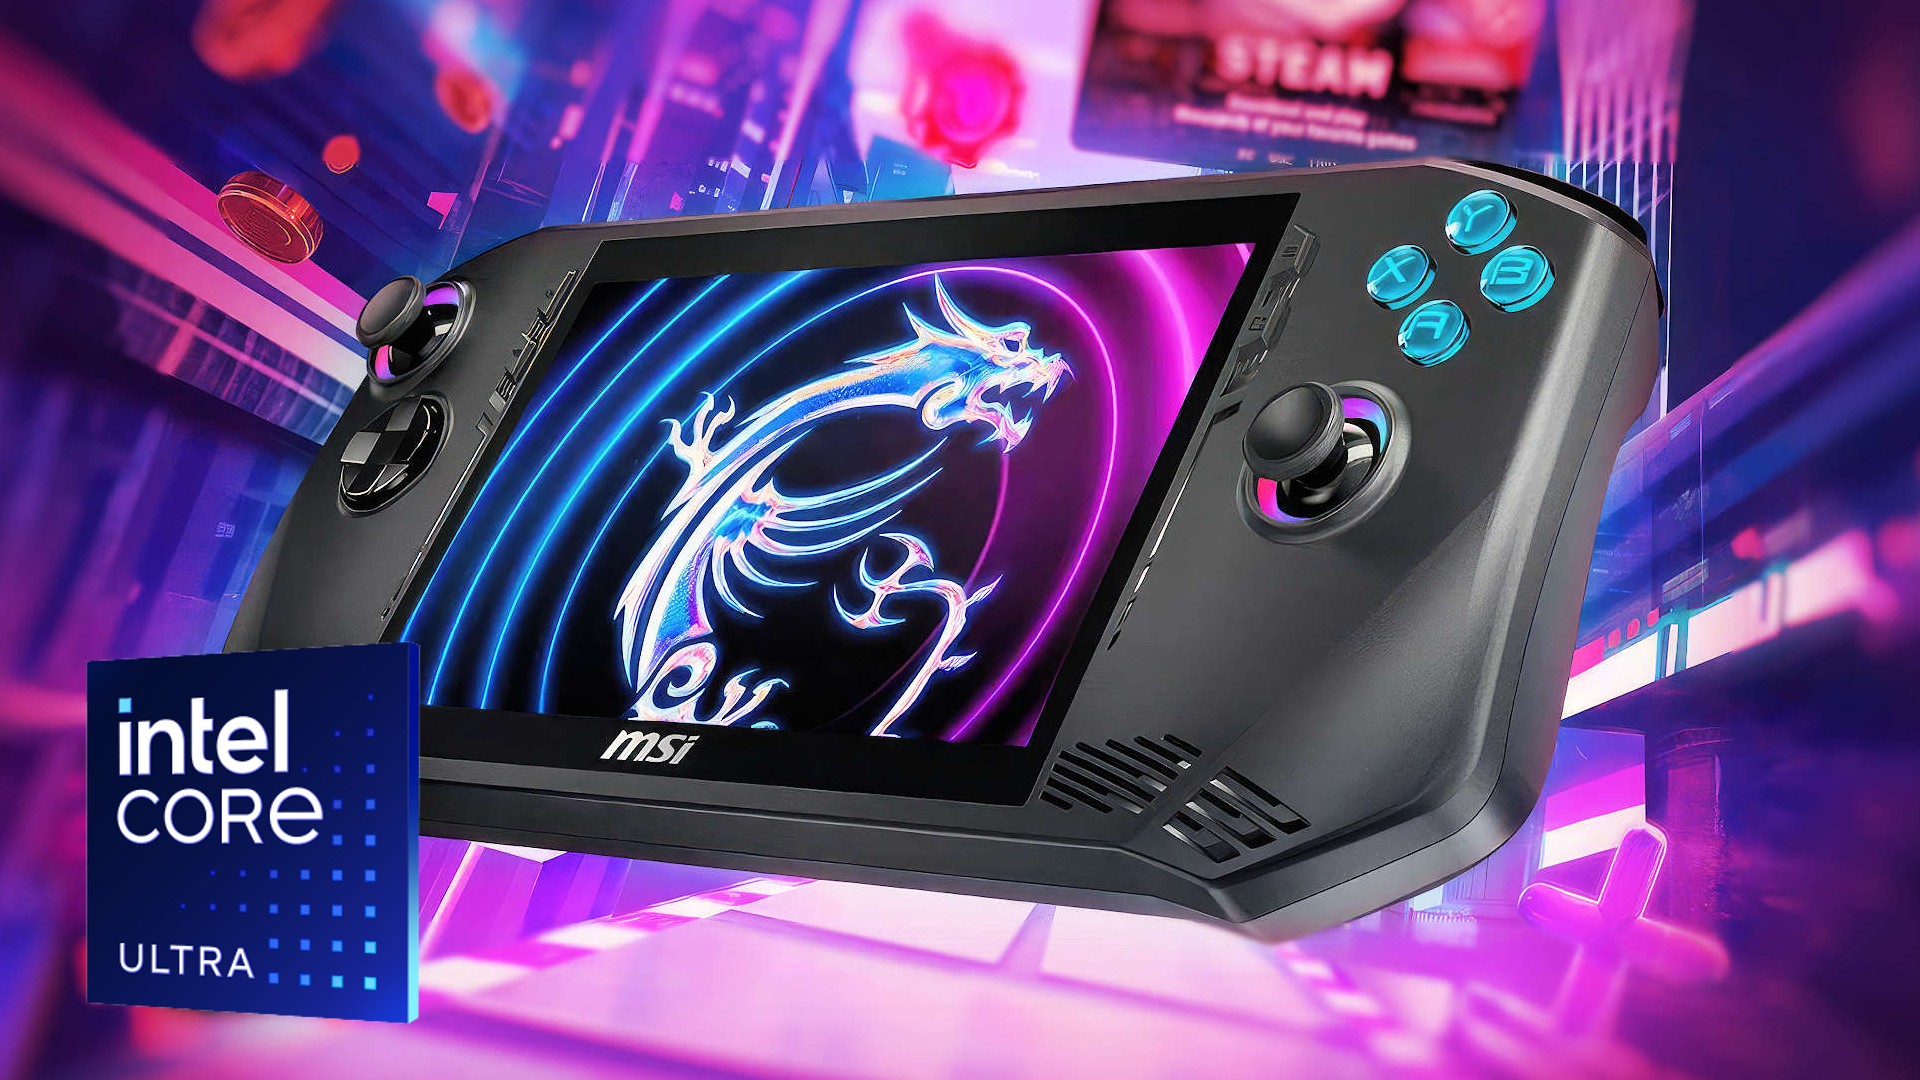 The MSI Claw is real, and it's the first Core Ultra gaming handheld